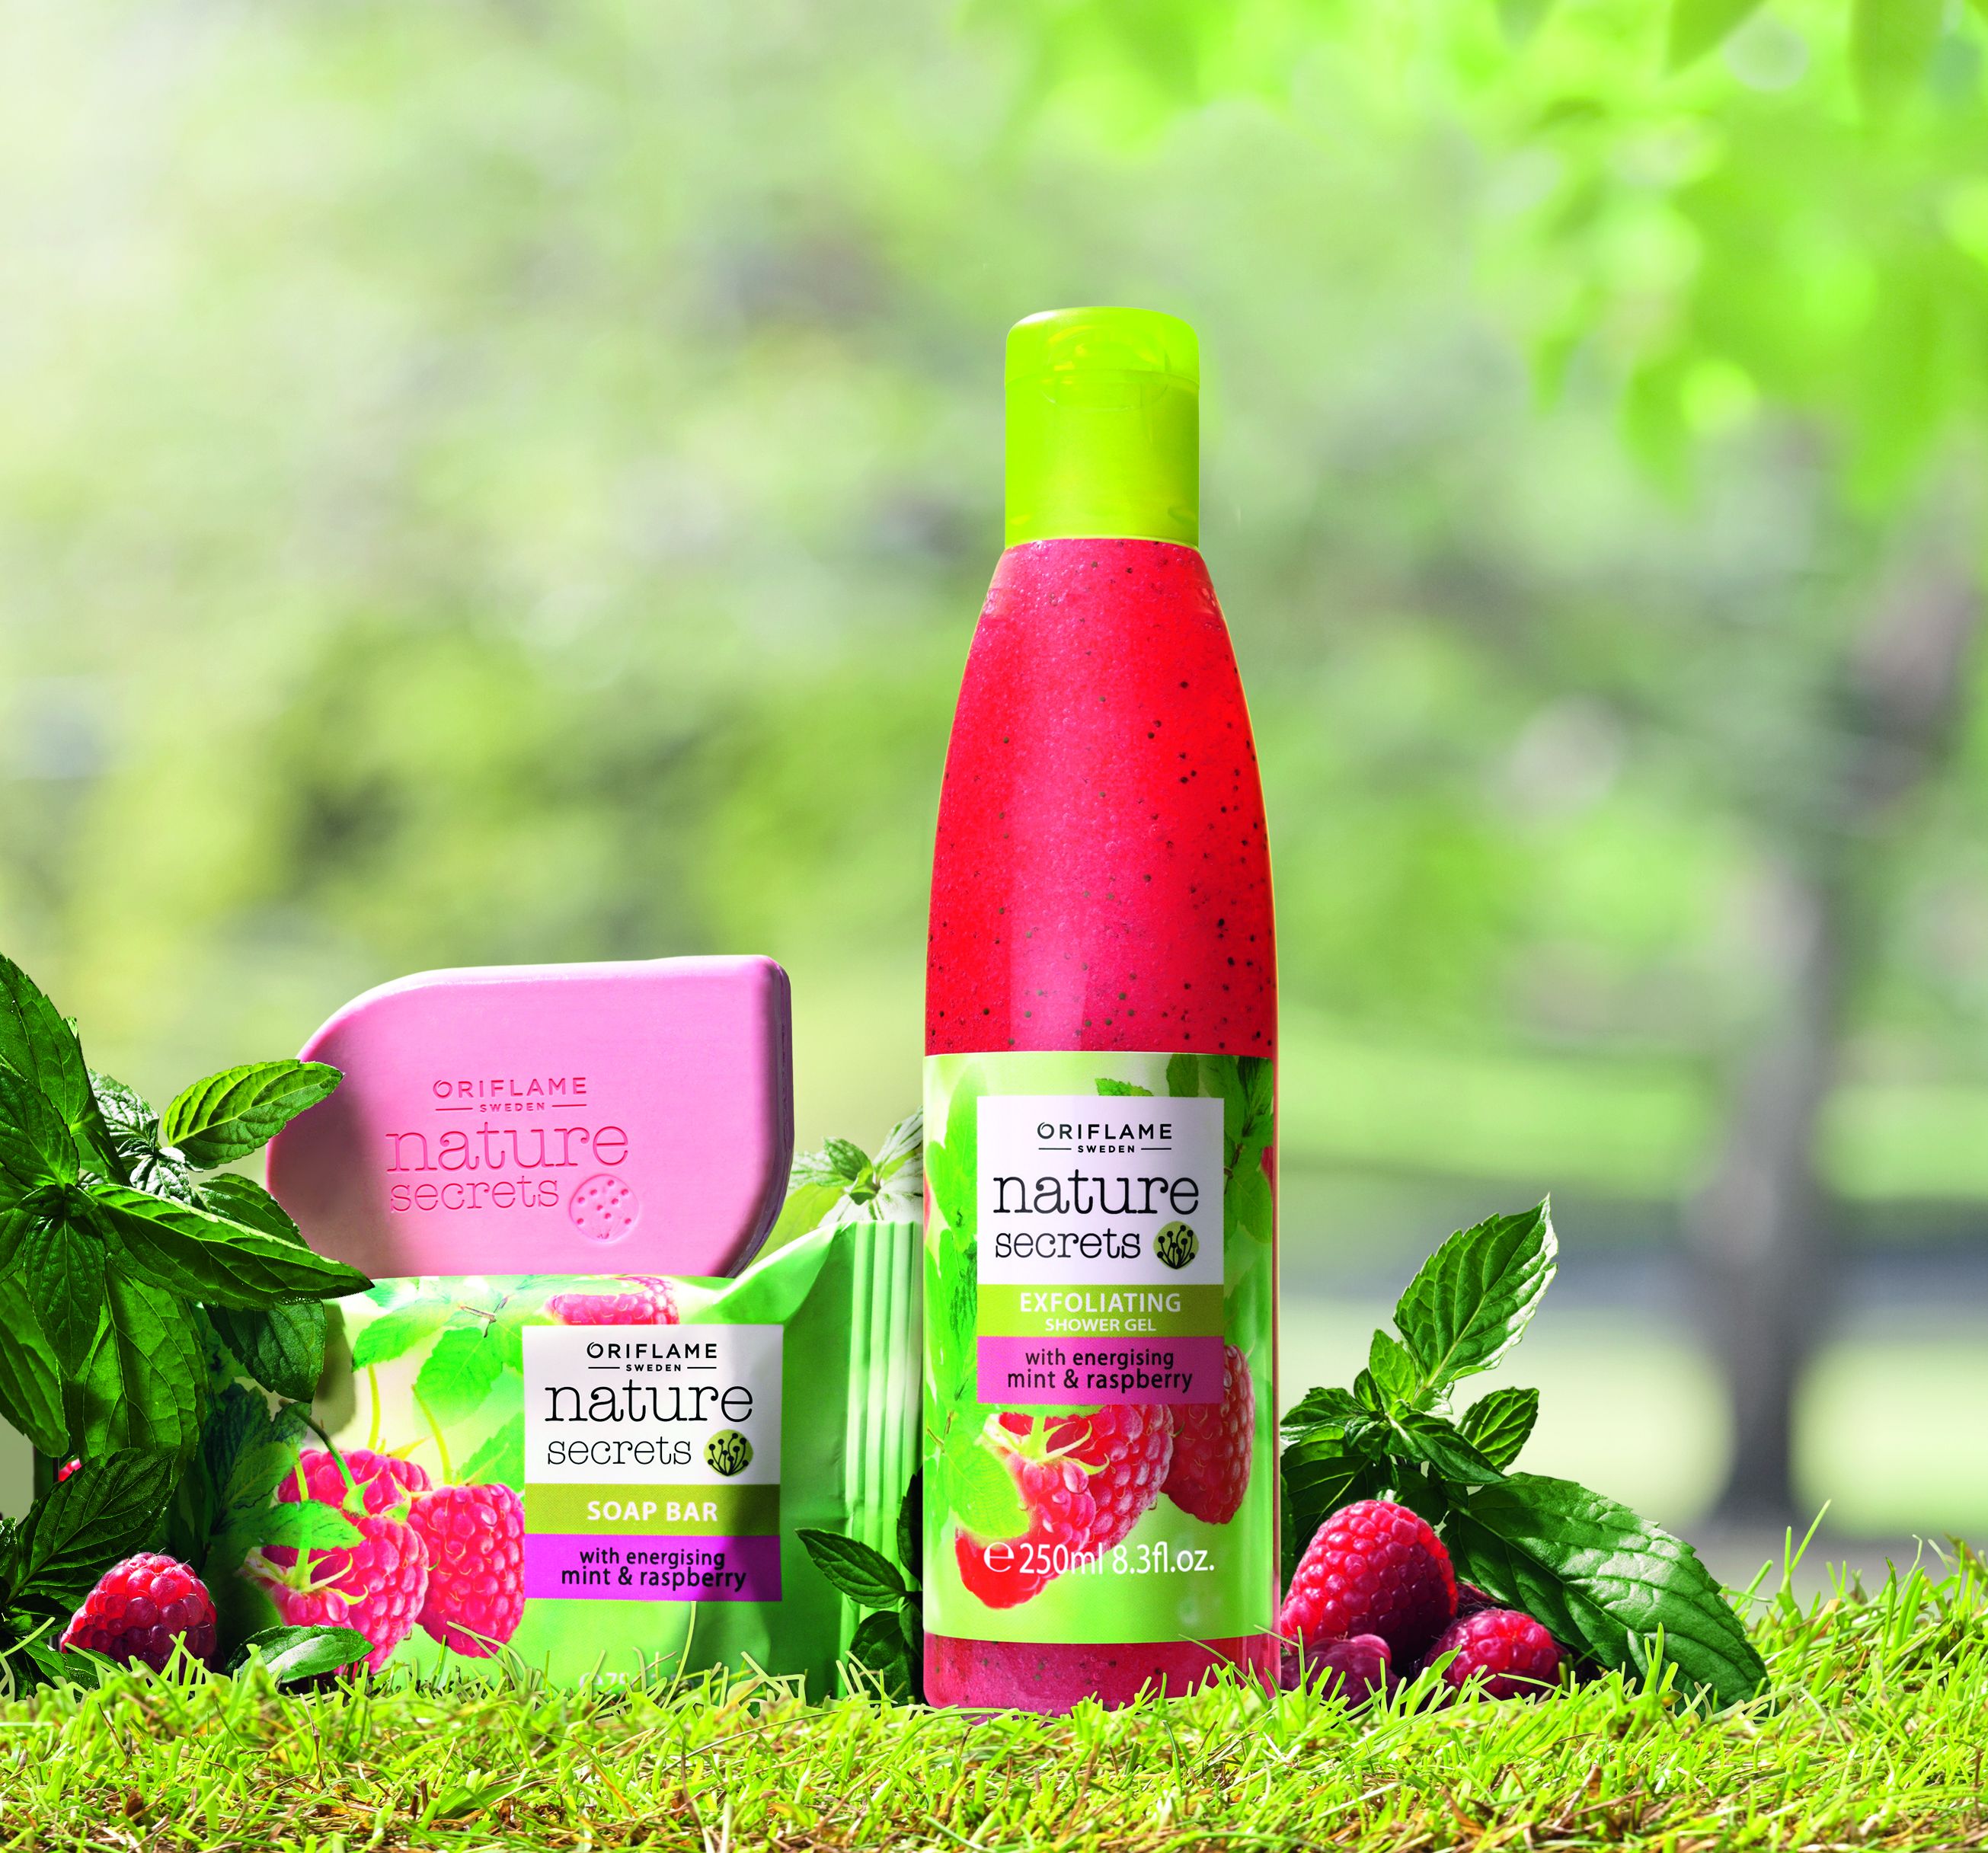 Oriflame Nature Secrets Energising Mint and Raspberry